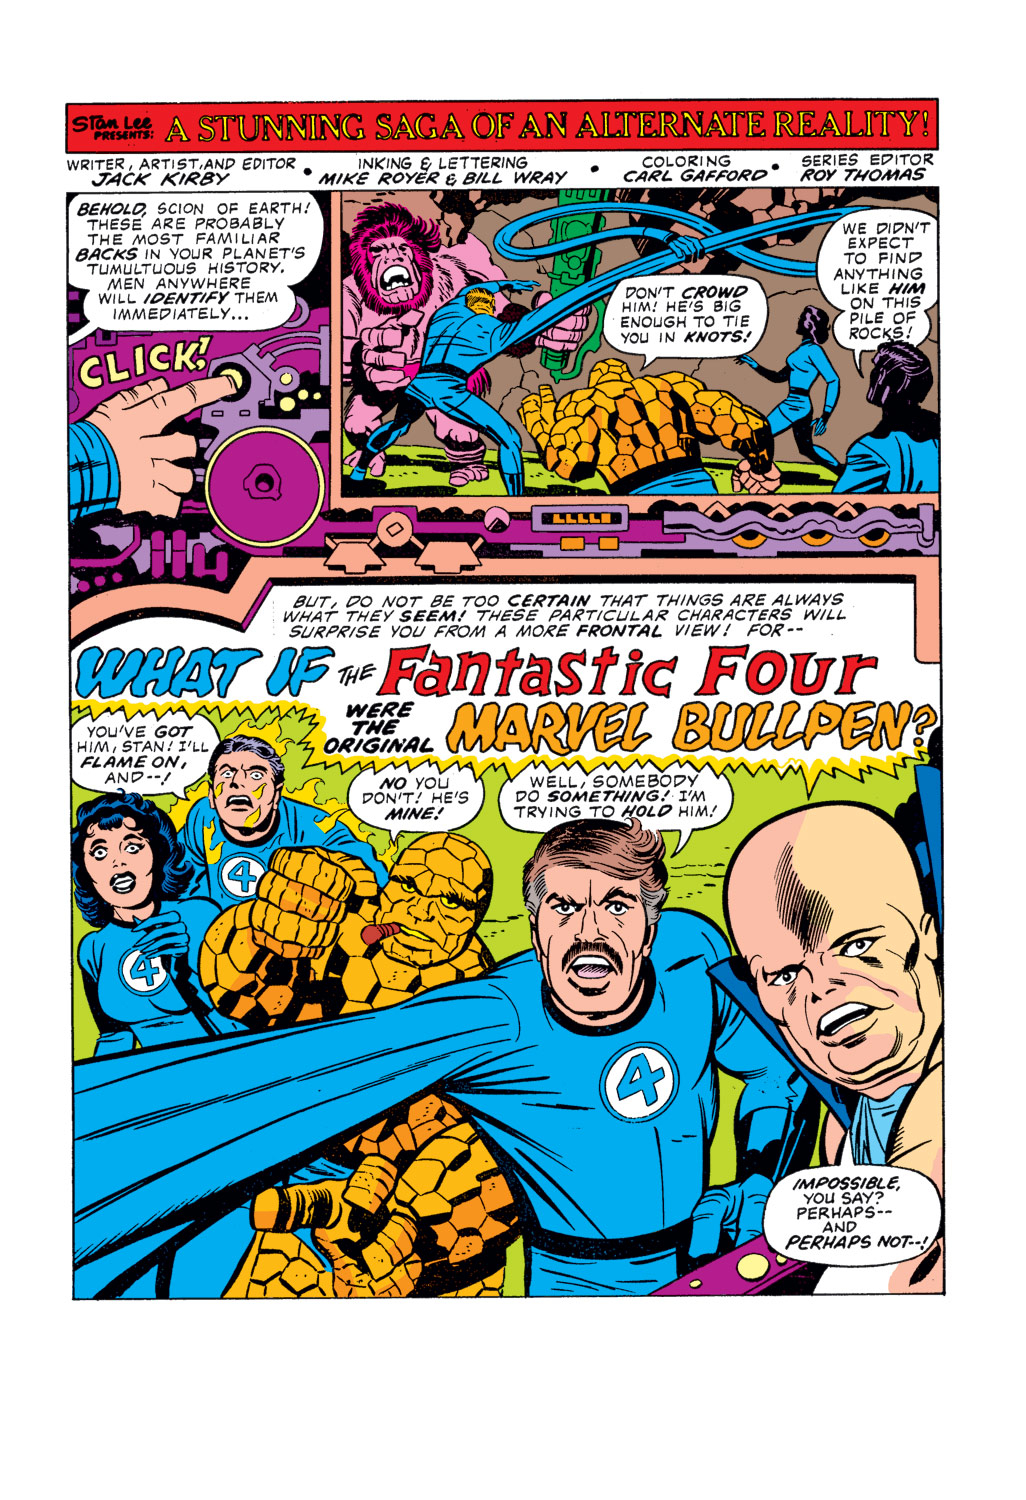 What If? (1977) issue 11 - The original marvel bullpen had become the Fantastic Four - Page 2